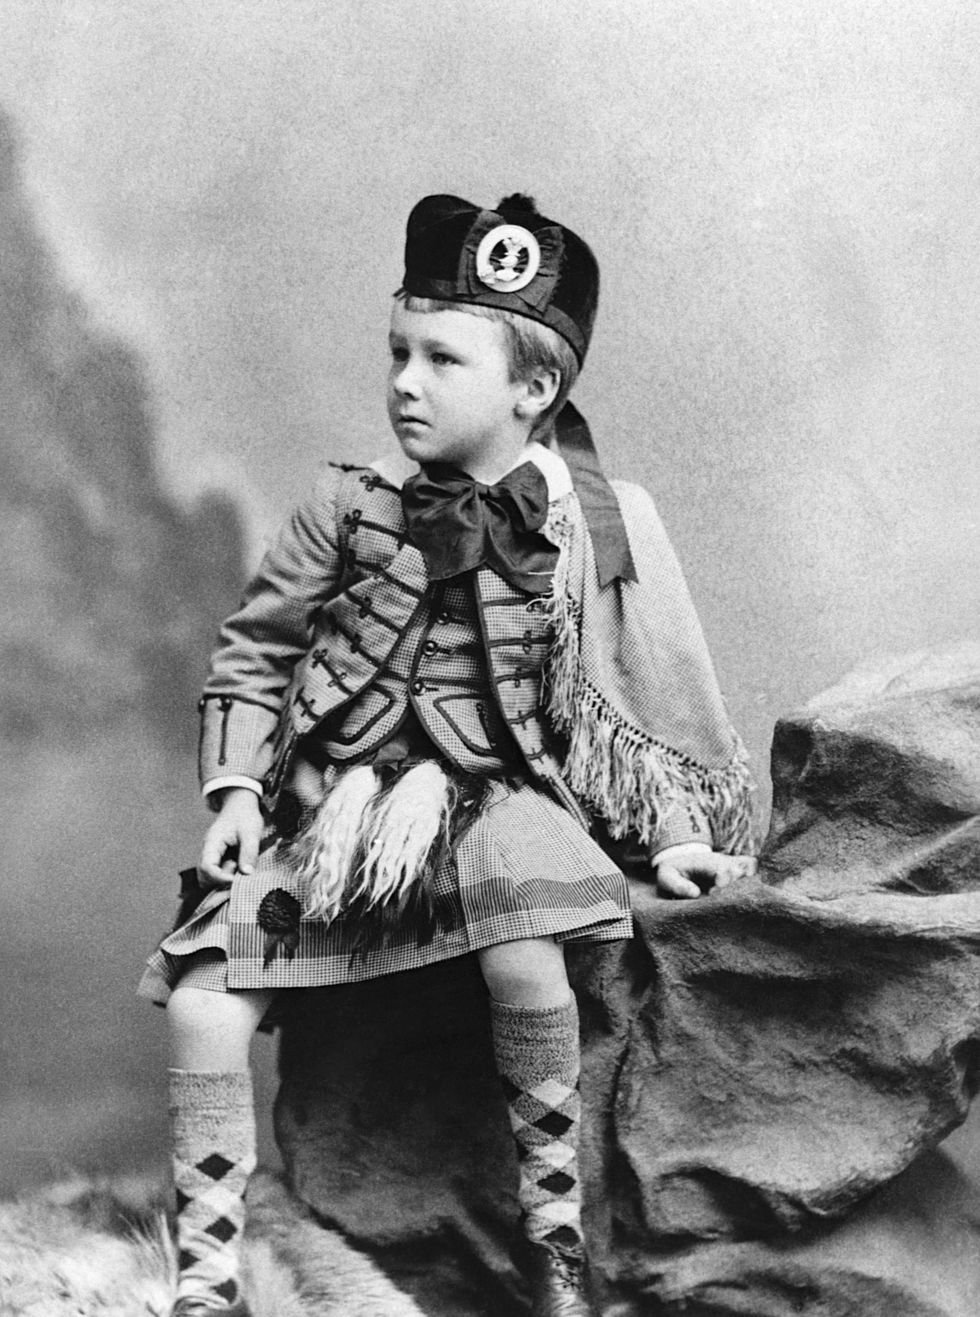 Franklin D. Roosevelt at the age of five